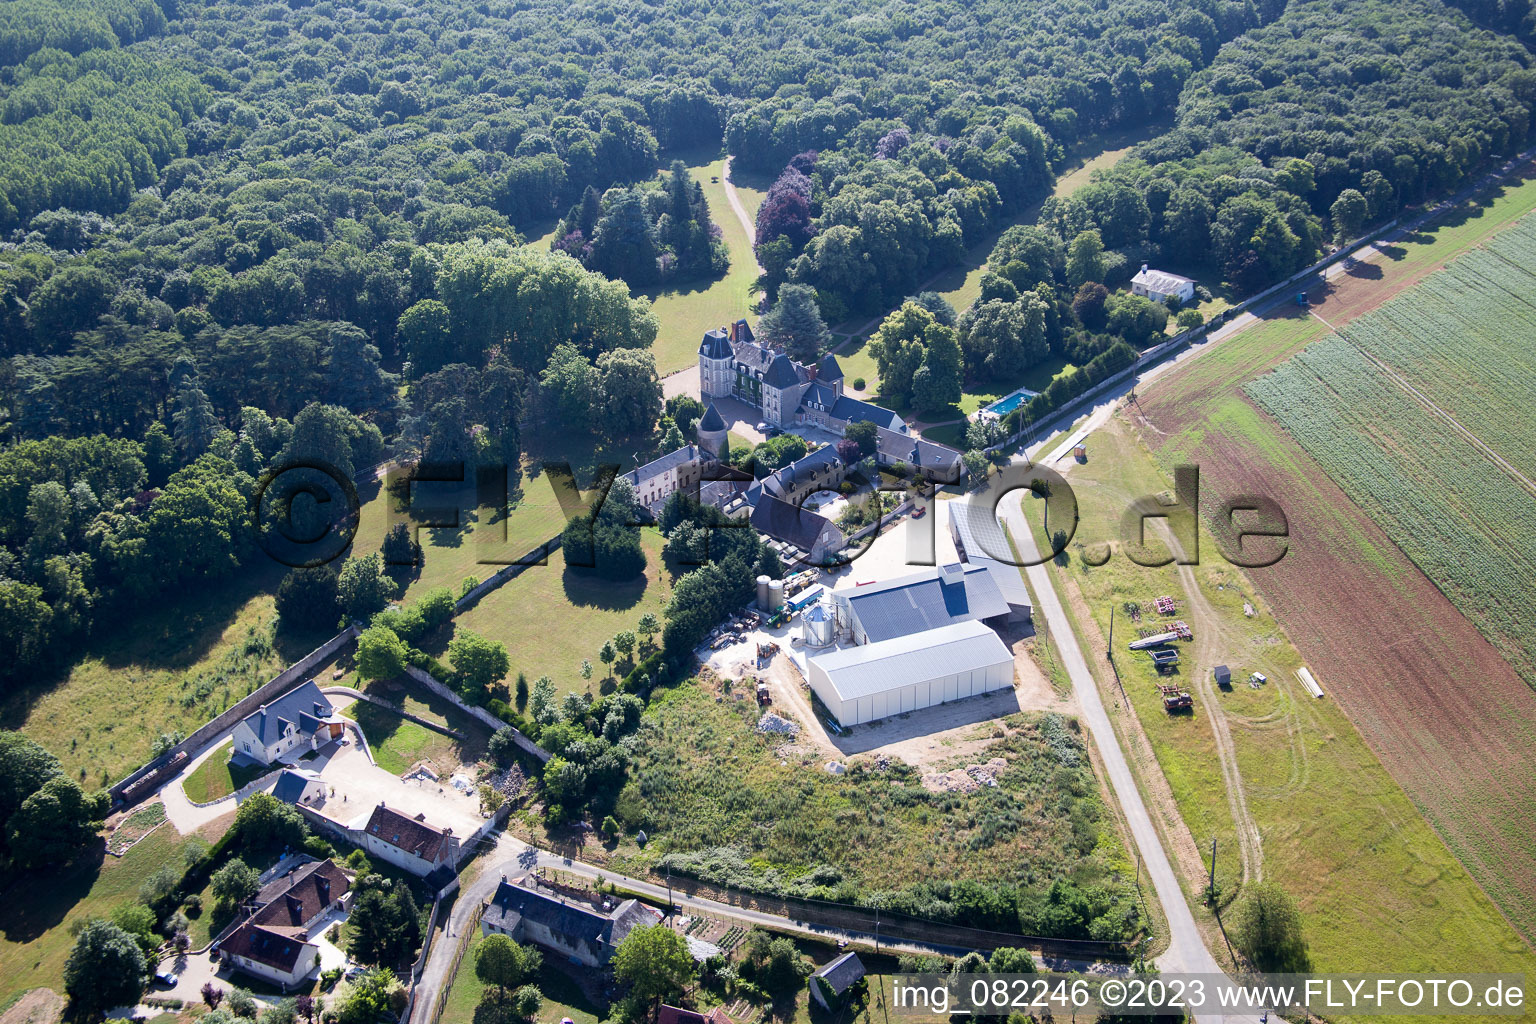 Landes-le-Gaulois in the state Loir et Cher, France out of the air